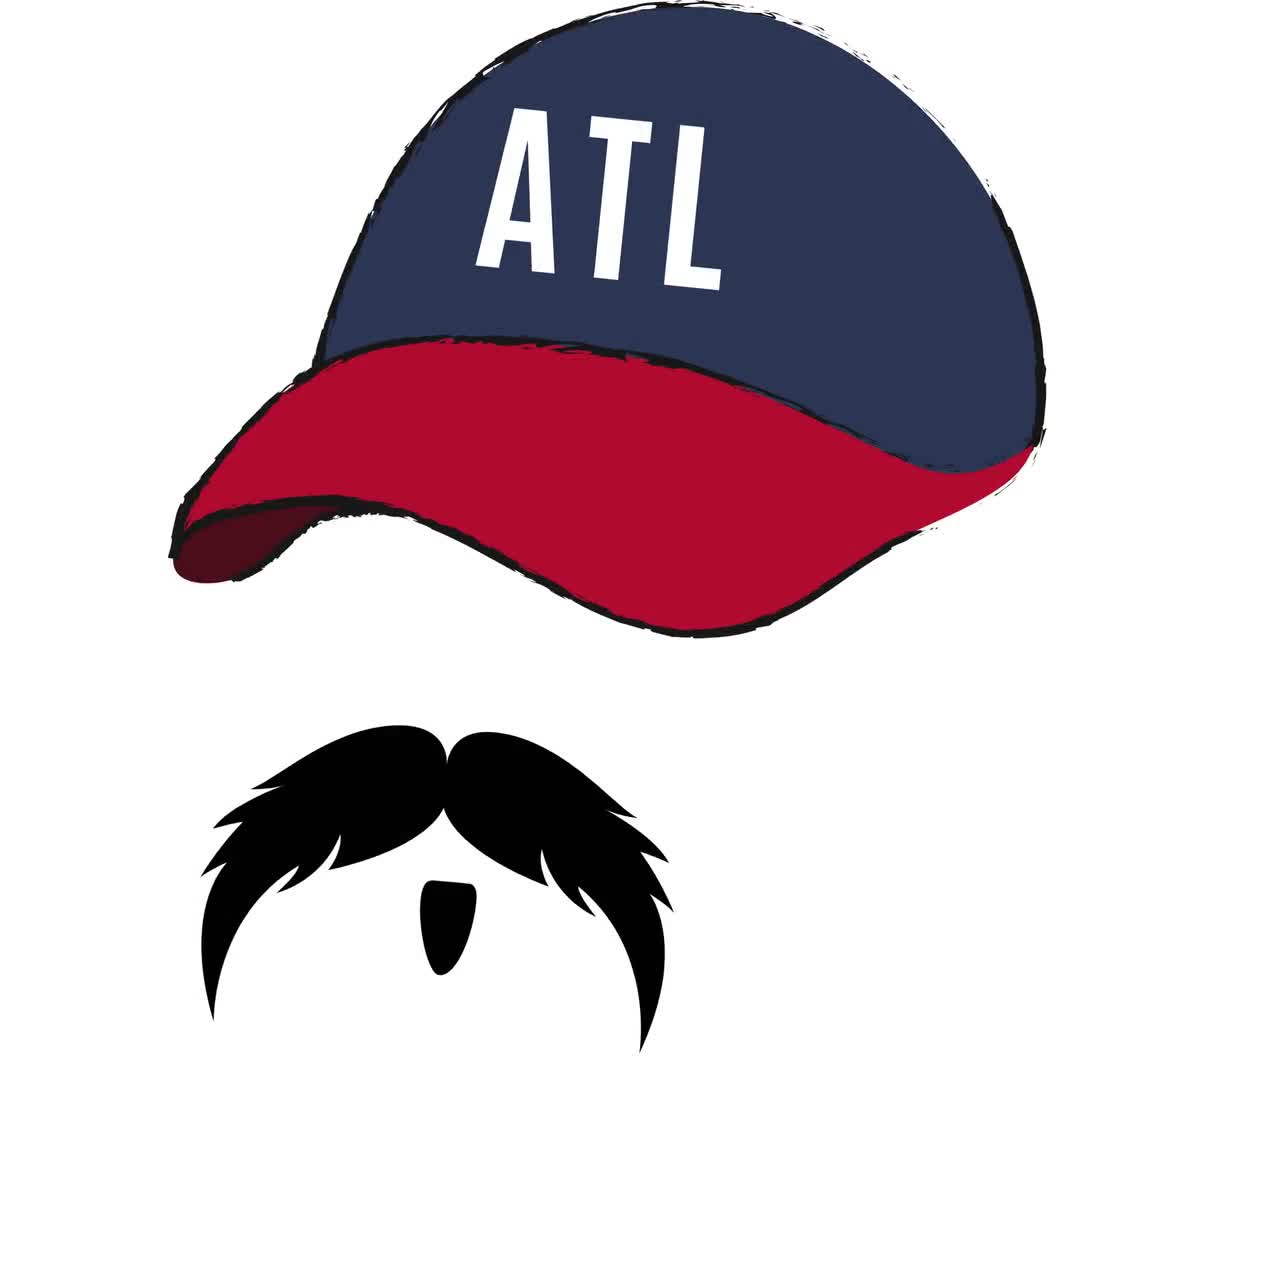 InkadelicApparel Spencer Strider Mustache Kids Shirt Atlanta Braves Rookie Pitcher Ace Georgia Baseball Champs Chop on Youth Fan Gear ATL